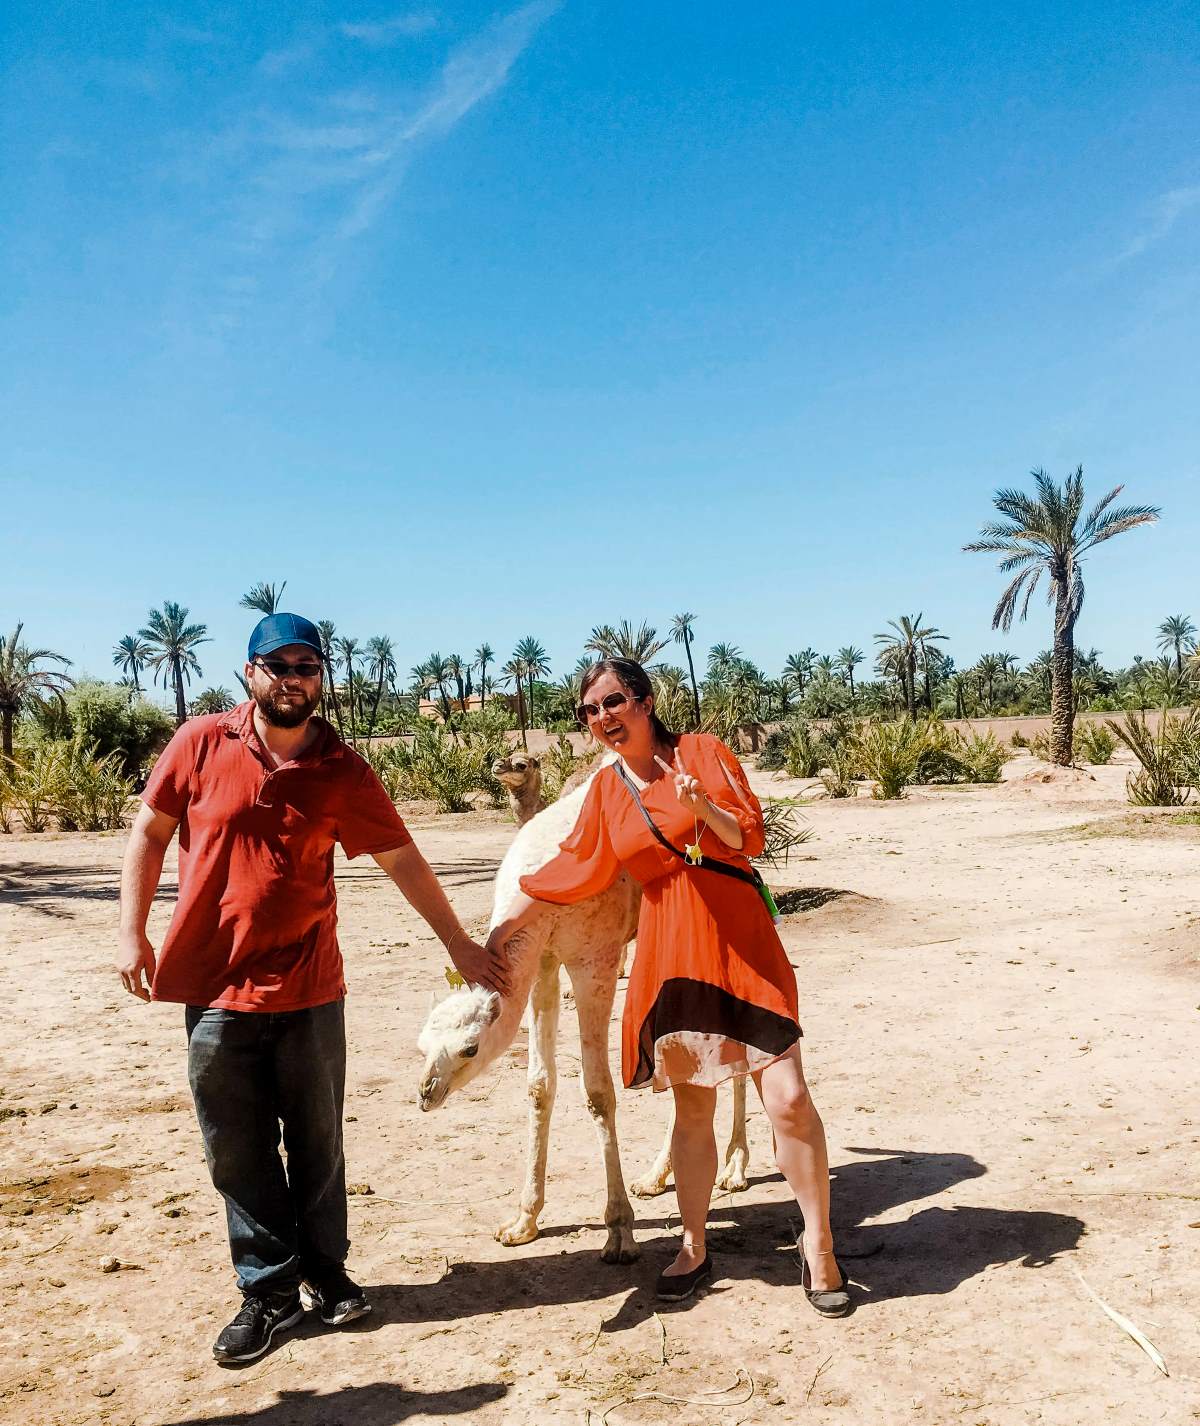 A couple petting a baby camel in Marrakech.